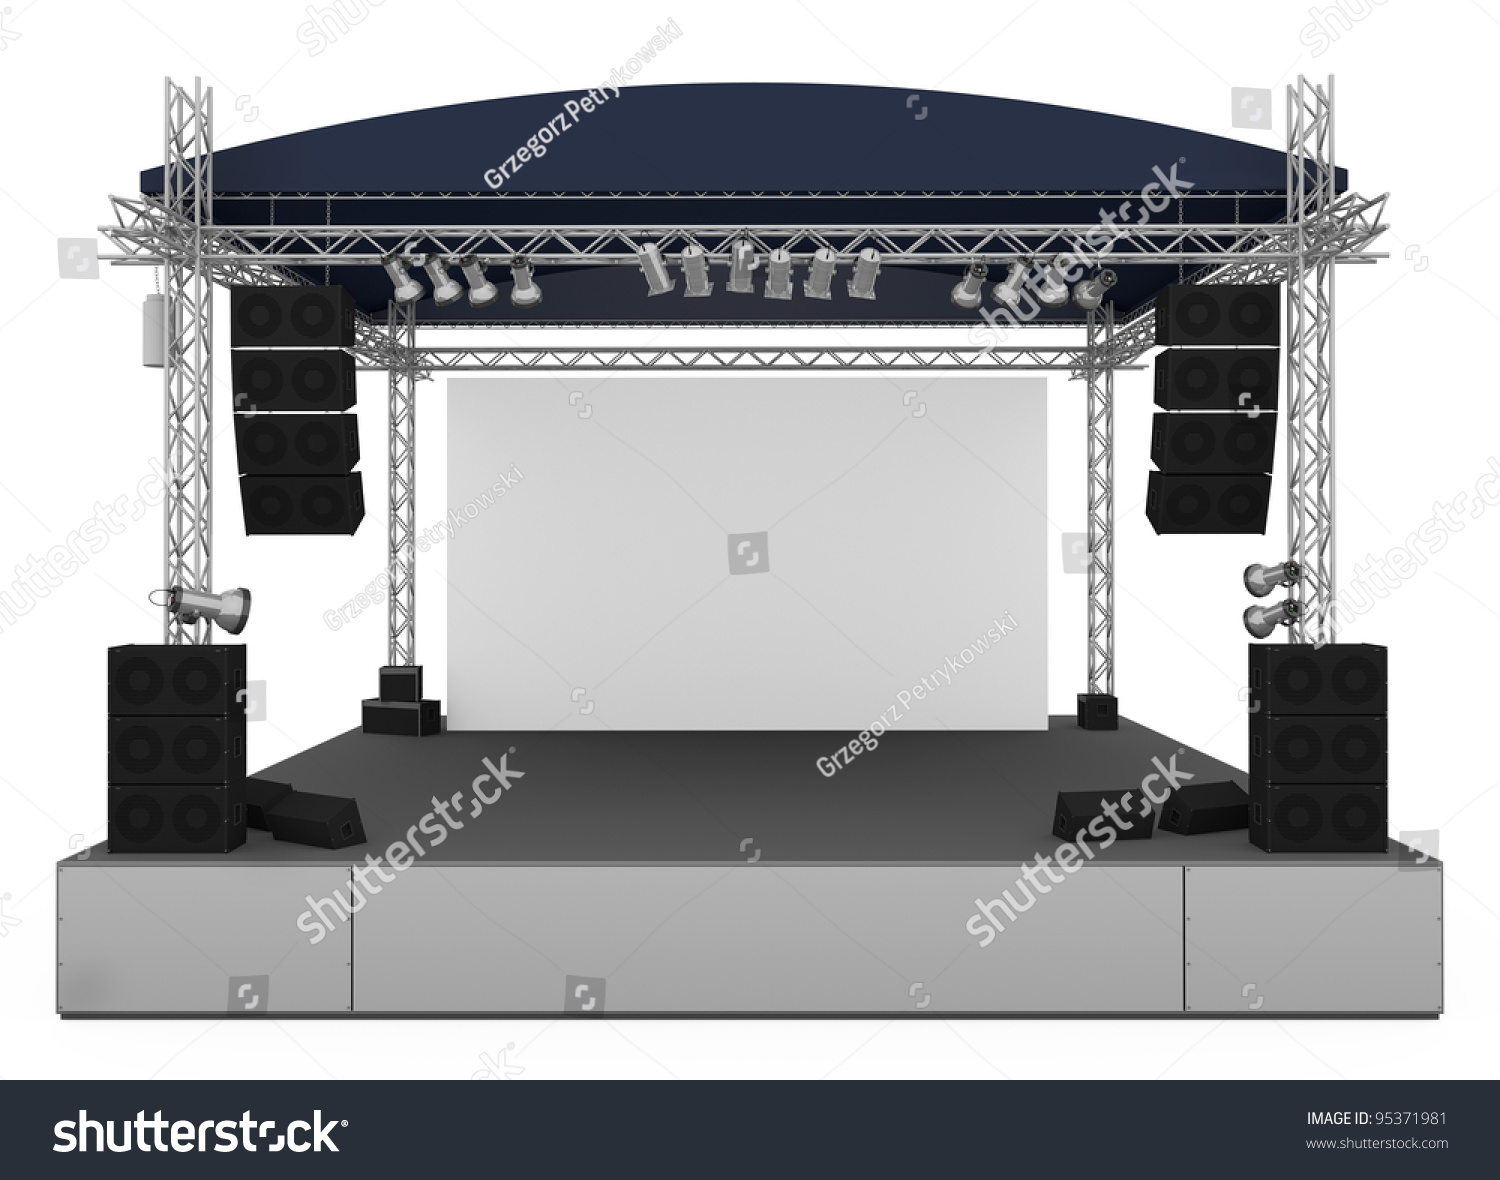 Download Front View Of Outdoor Gig Stage 3d Render Royalty Free Stock Photo 95371981 Avopix Com